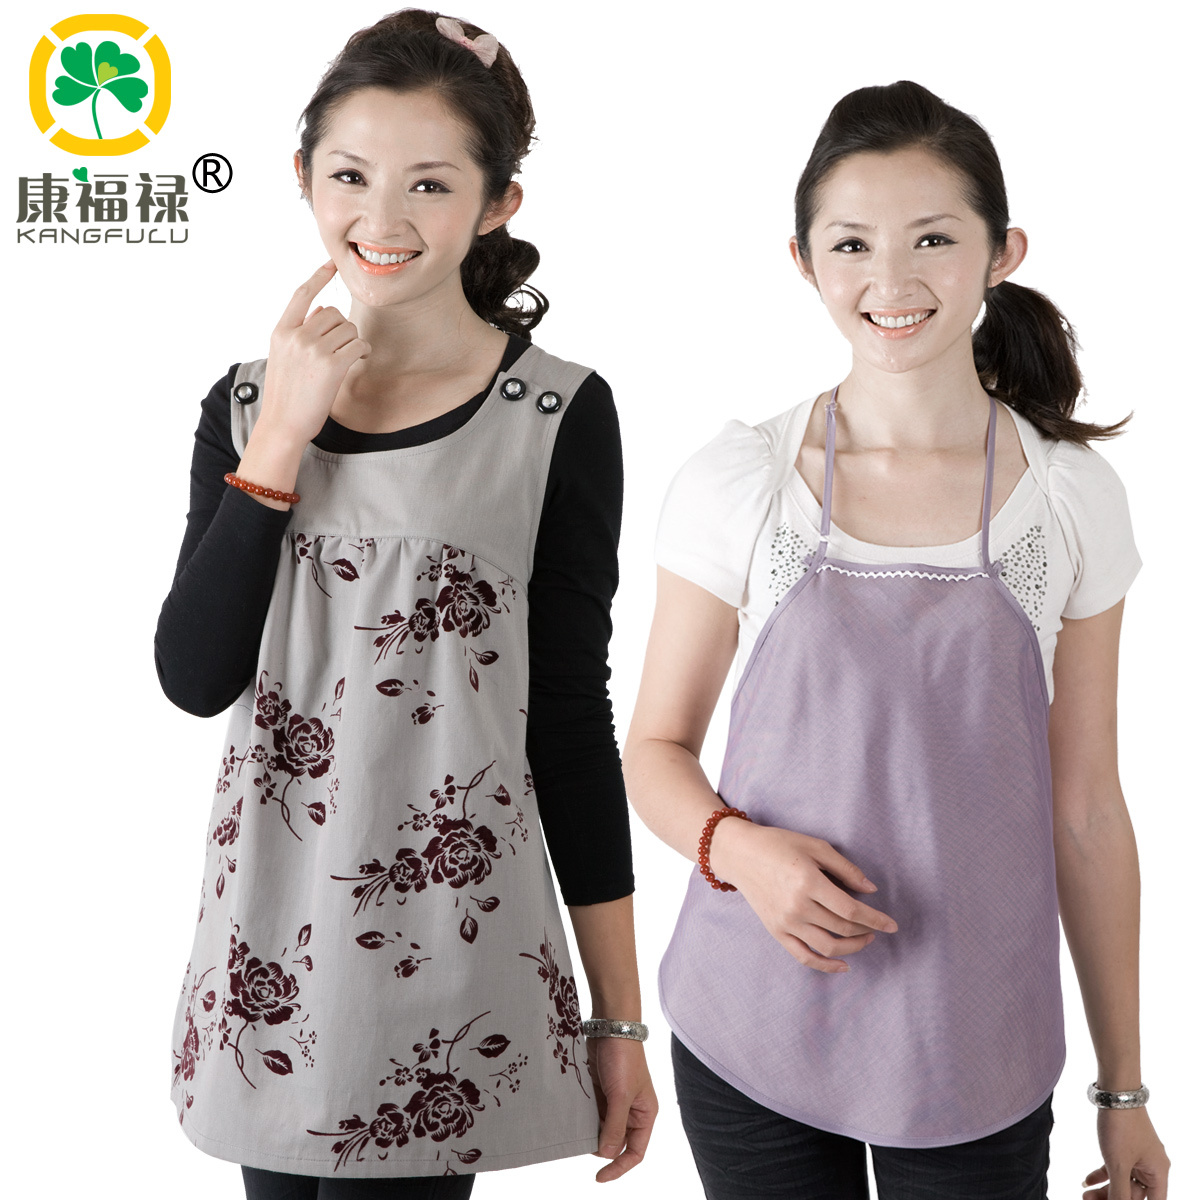 Maternity clothing superacids radiation-resistant silver fiber apron type lining kfl801a